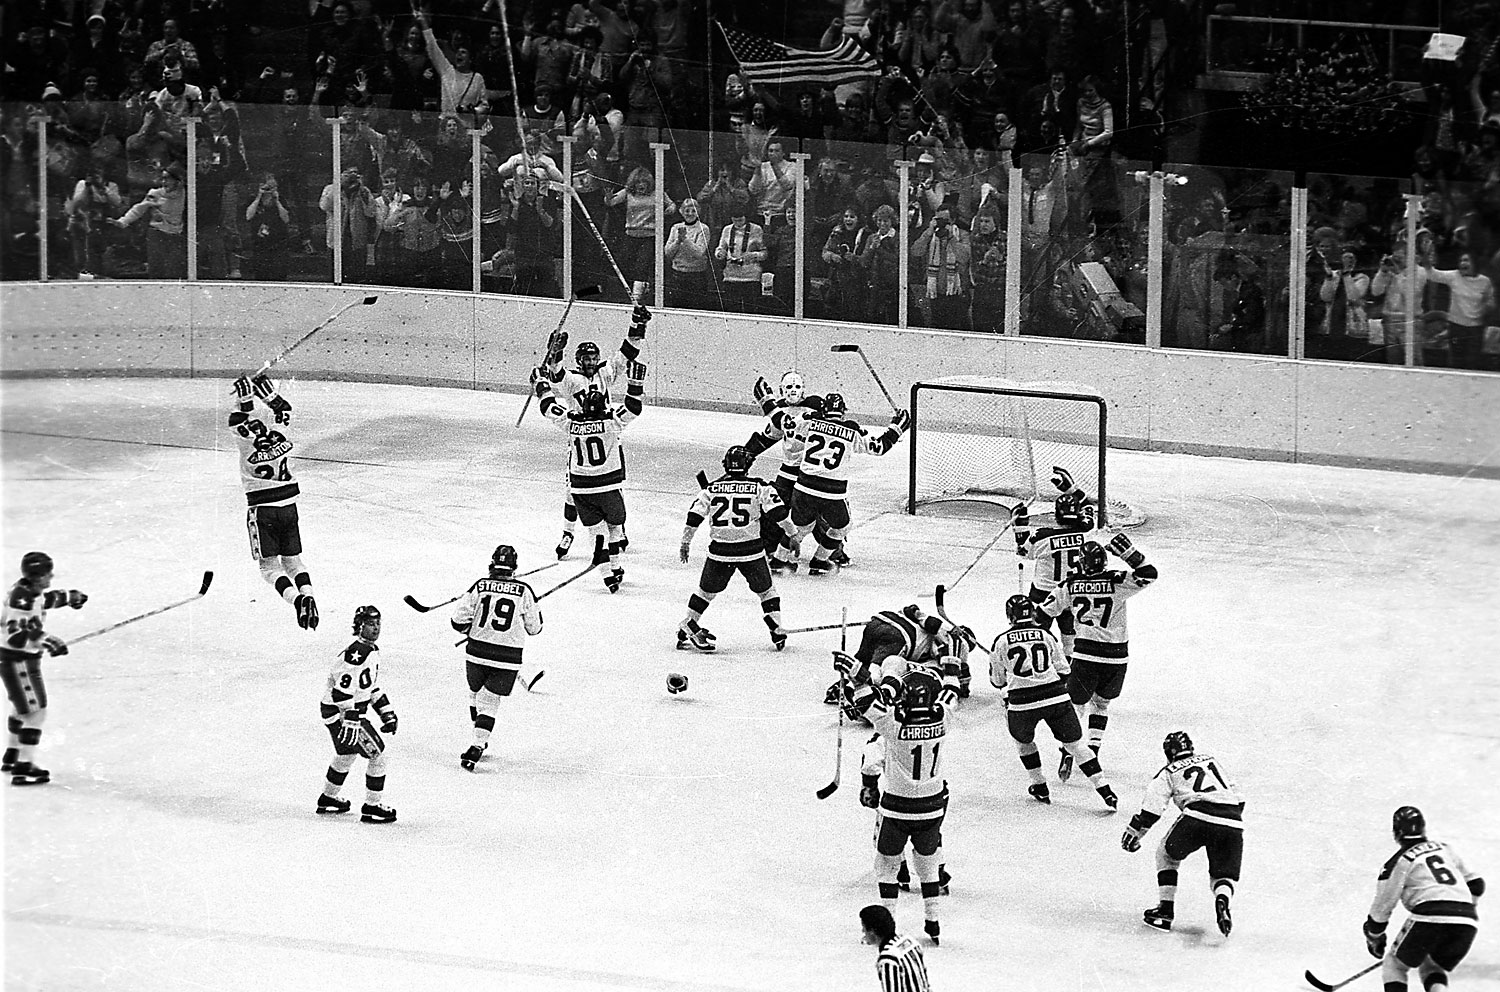 The U.S ice hockey team rushes toward goalie Jim Craig after their upset win over the Soviet Union in the semi-final round of the XIII Winter Olympic Games in Lake Placid, N.Y., Feb. 22, 1980.